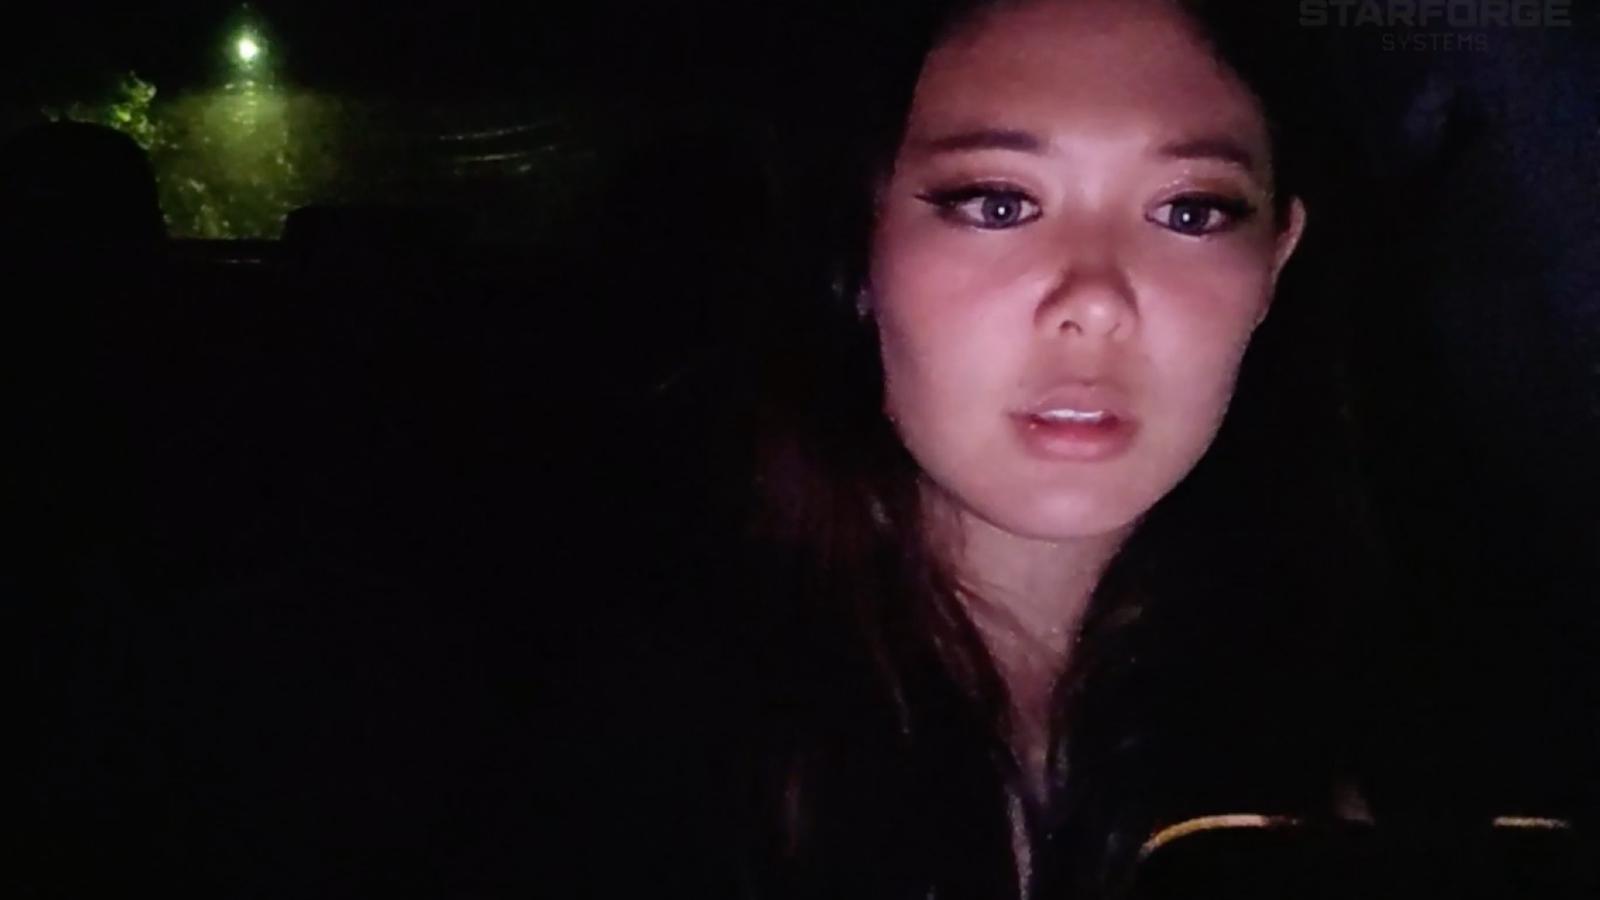 ExtraEmily looking at her phone while in the car during Twitch stream